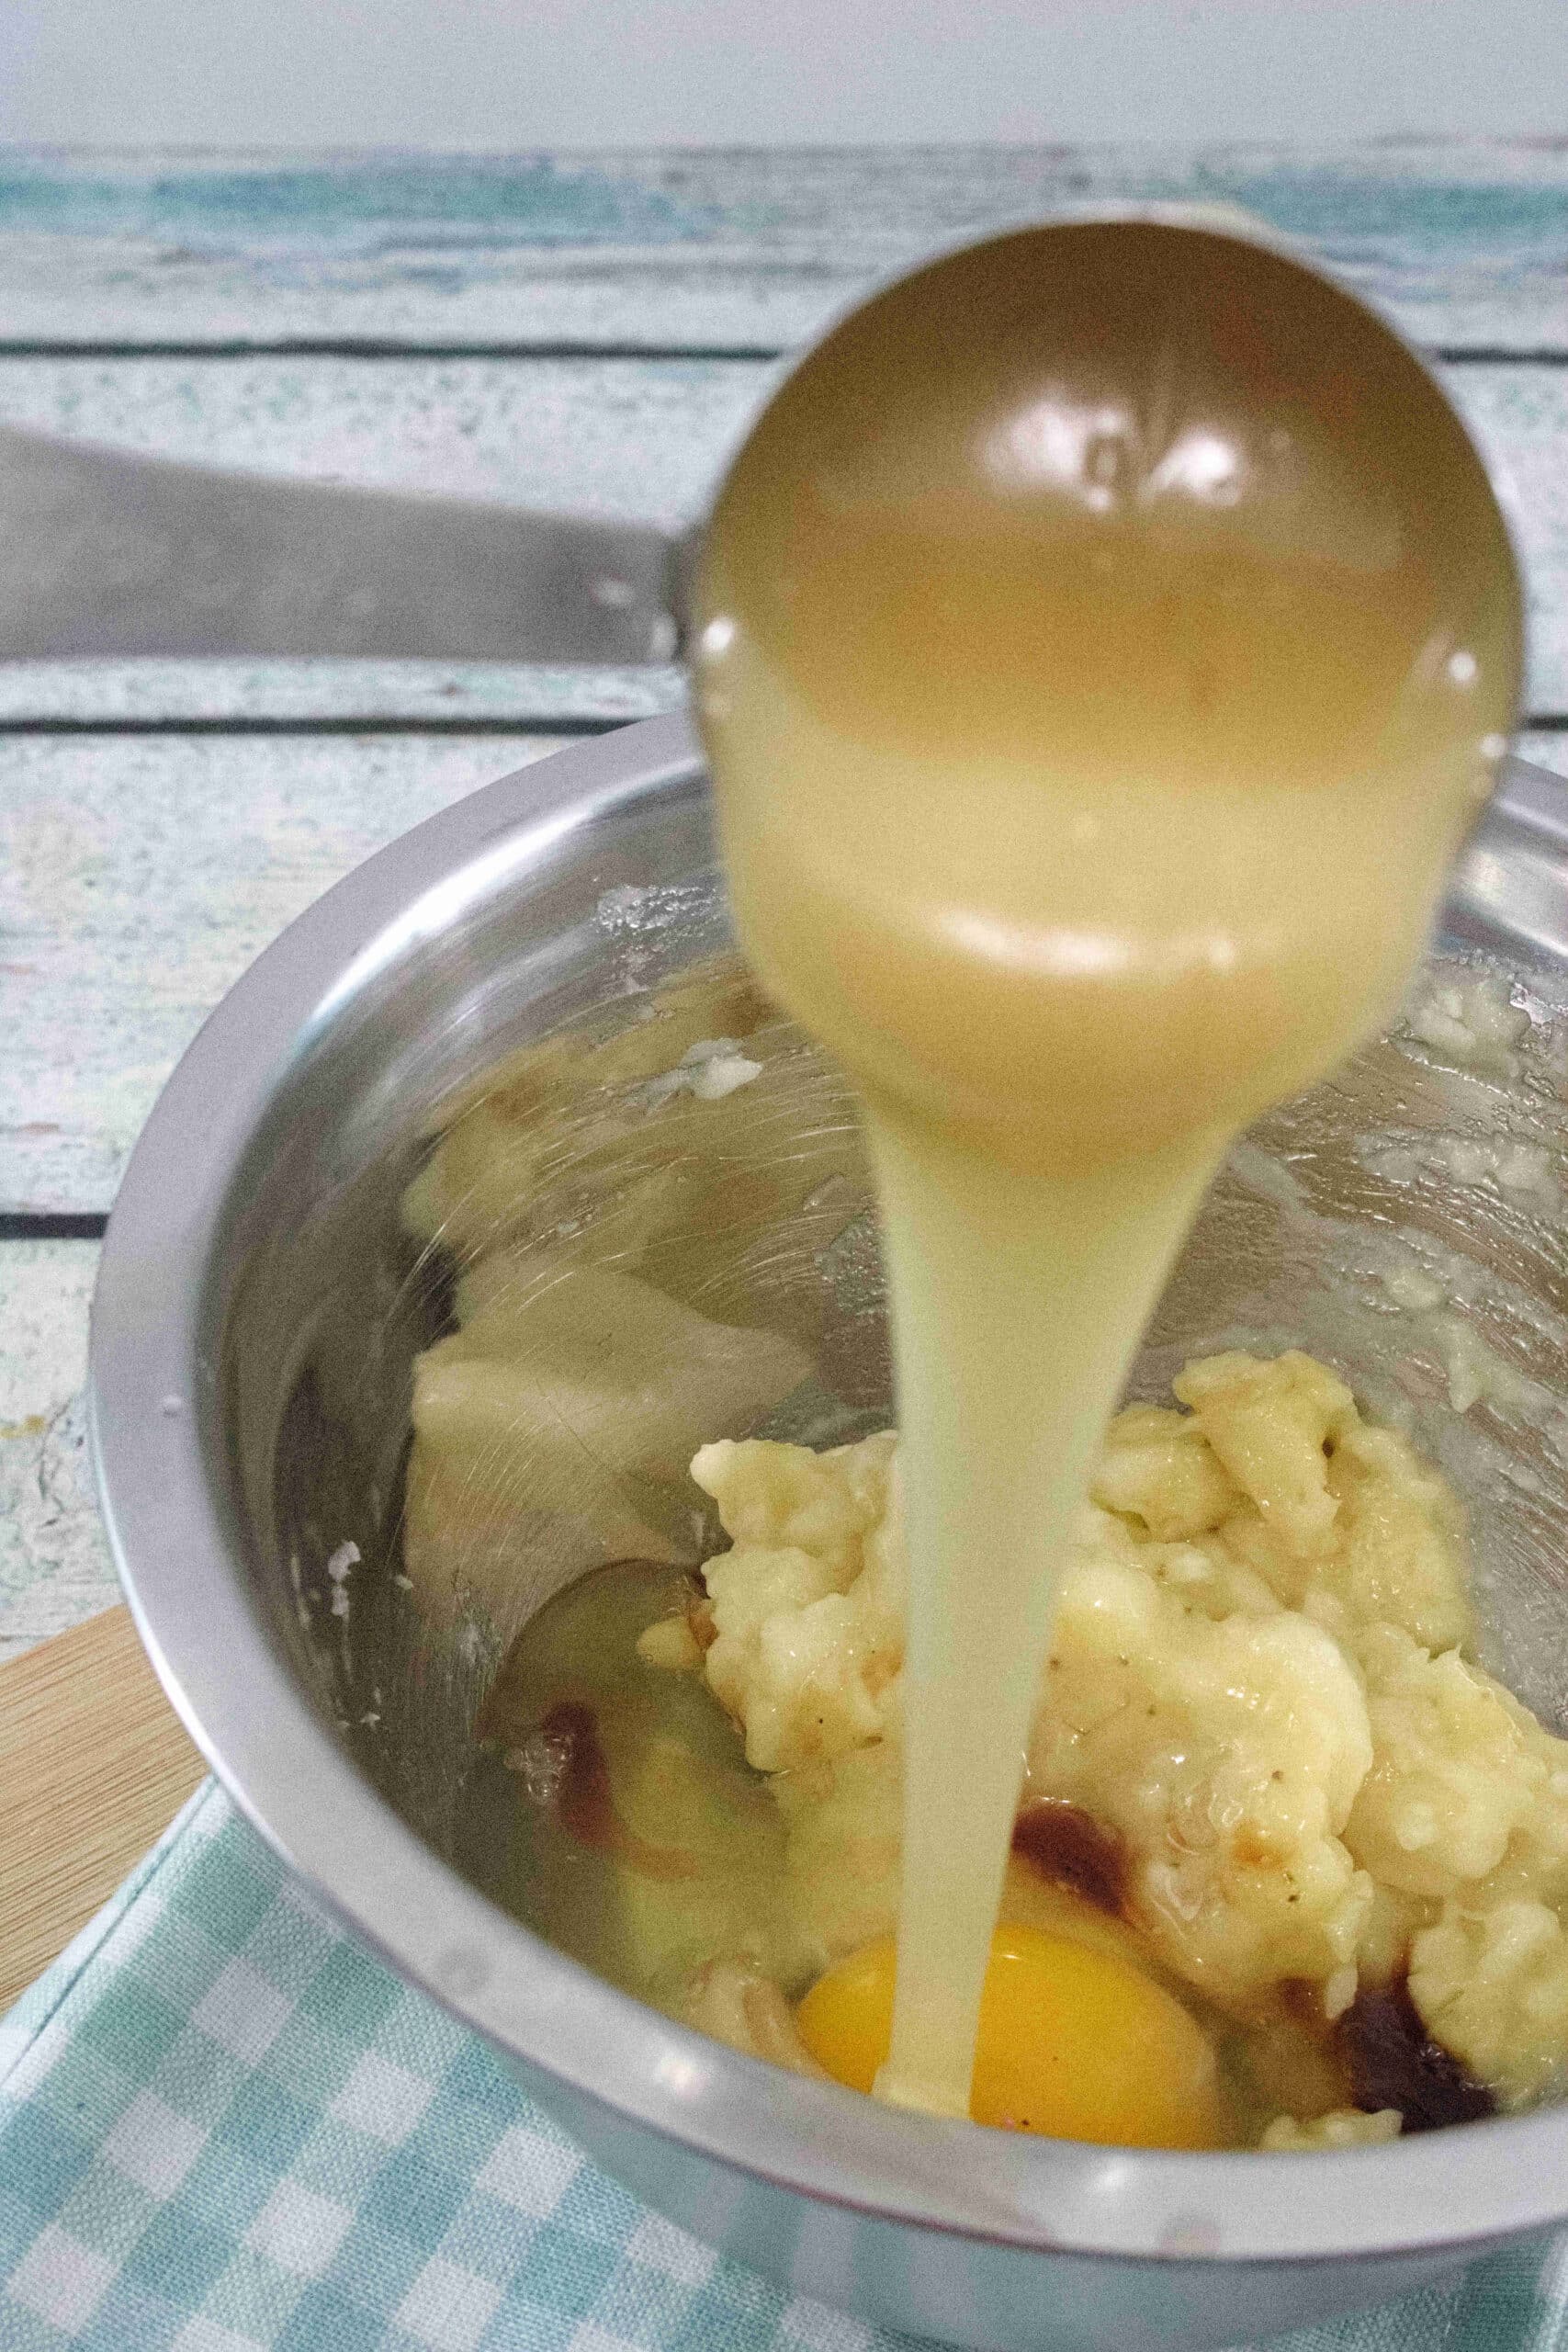 Honey being poured into a steel bowl with mashed banana and egg.